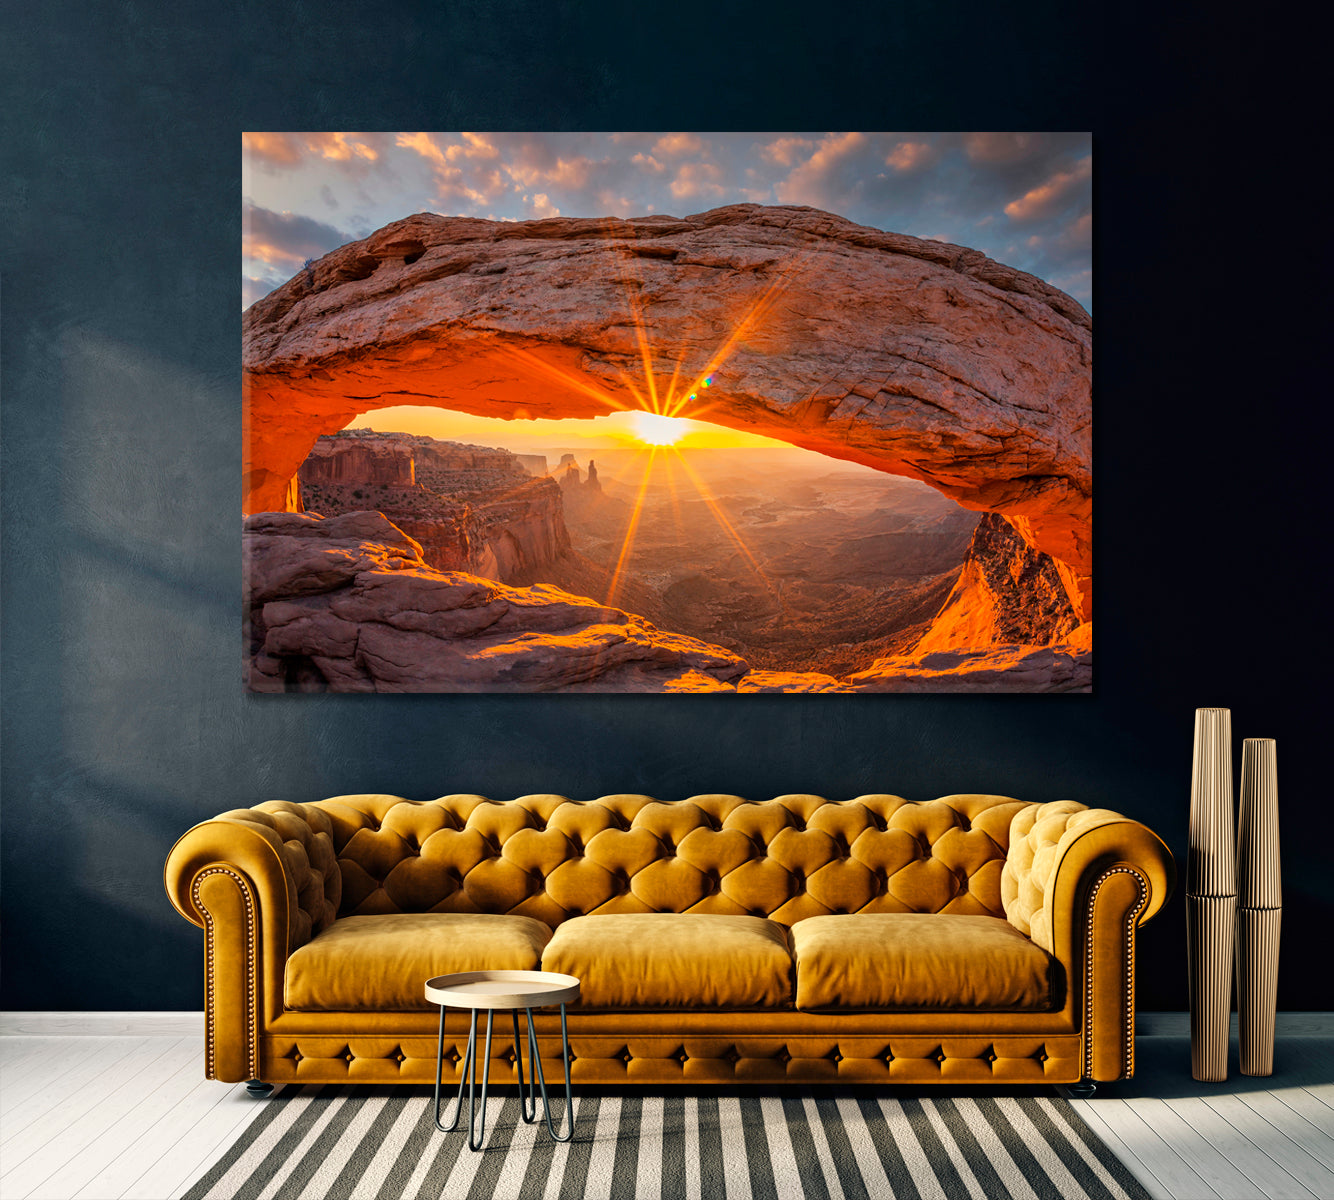 Mesa Arch at Sunrise in Canyonlands National Park Utah USA Canvas Print ArtLexy 1 Panel 24"x16" inches 